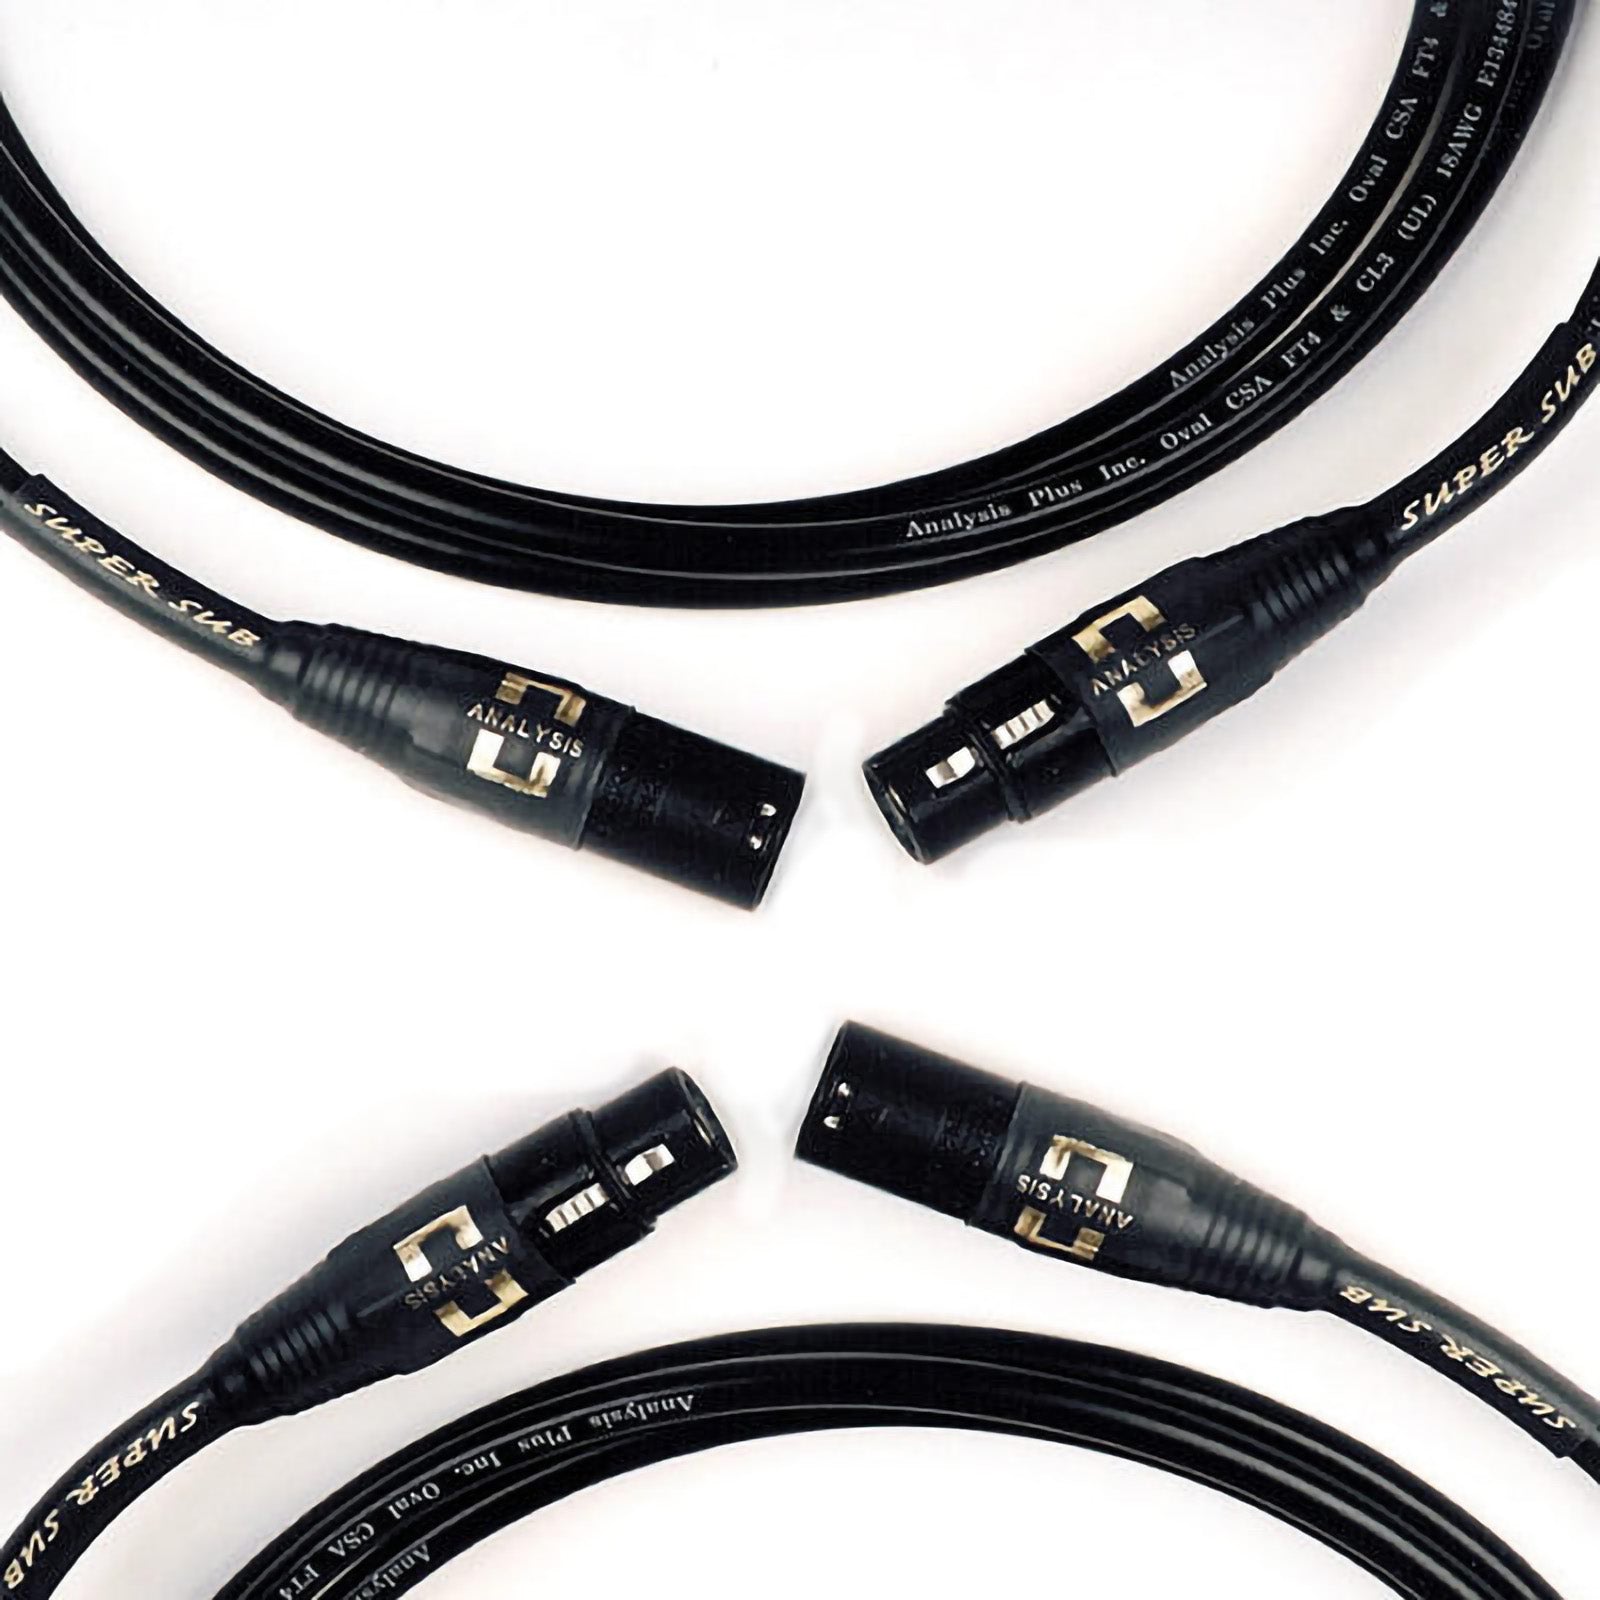 Analysis Plus Super Sub Interconnect Cable